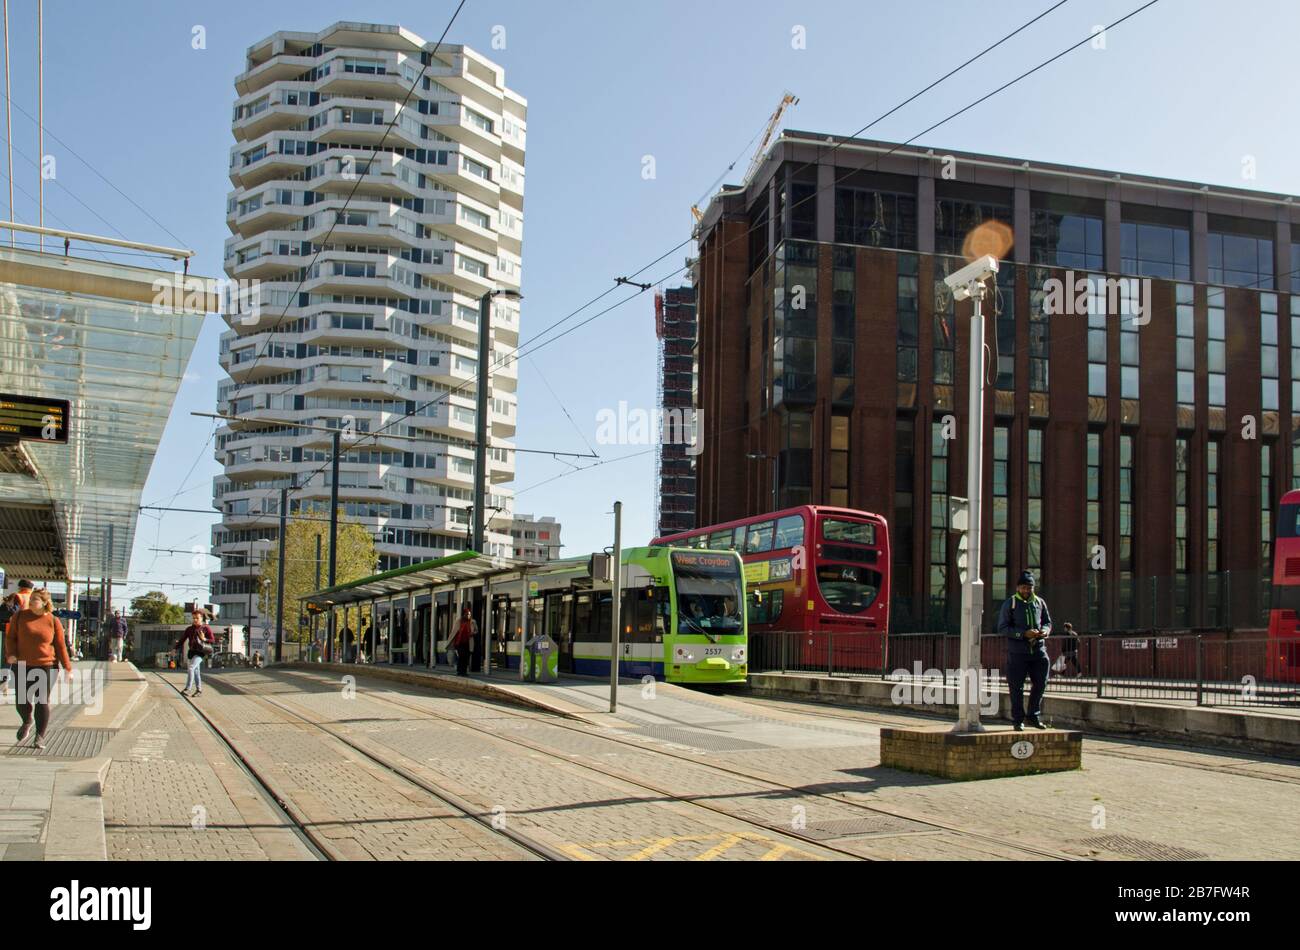 Croydon, UK - October 2, 2019:  Travellers using the various transport offerings outside East Croydon railway station on a sunny autumn day in South L Stock Photo